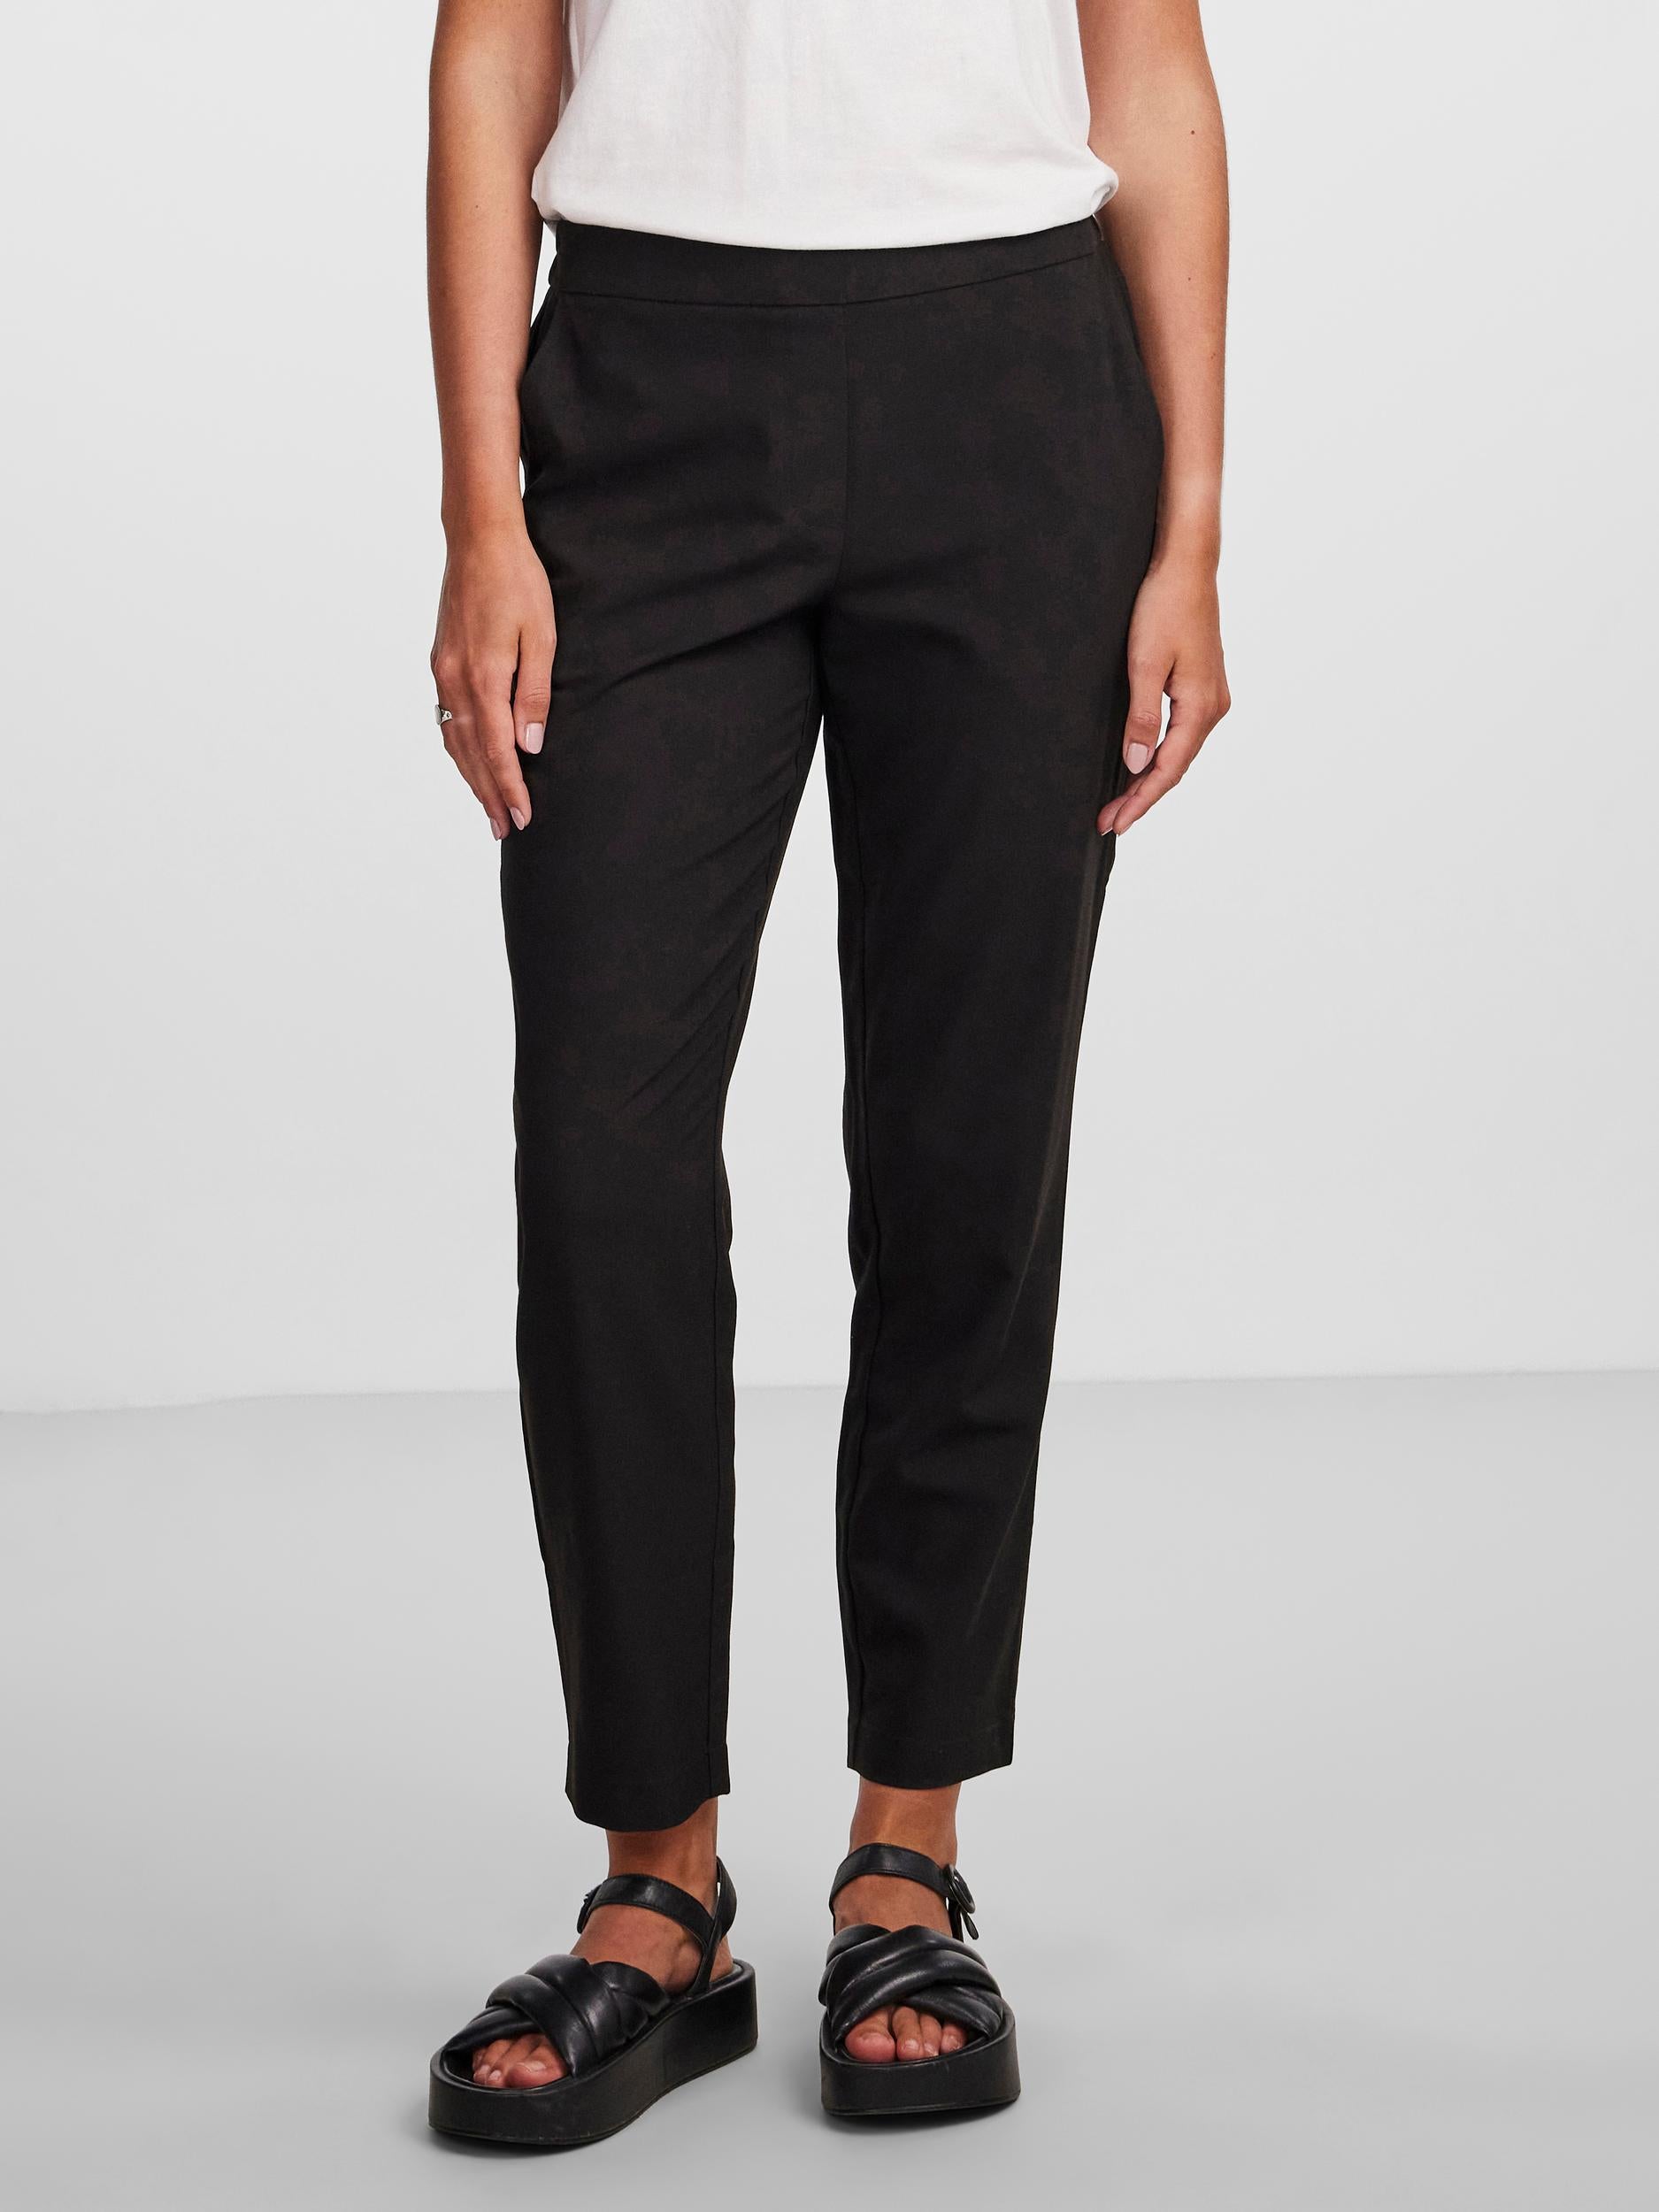 Pieces black tapered trousers